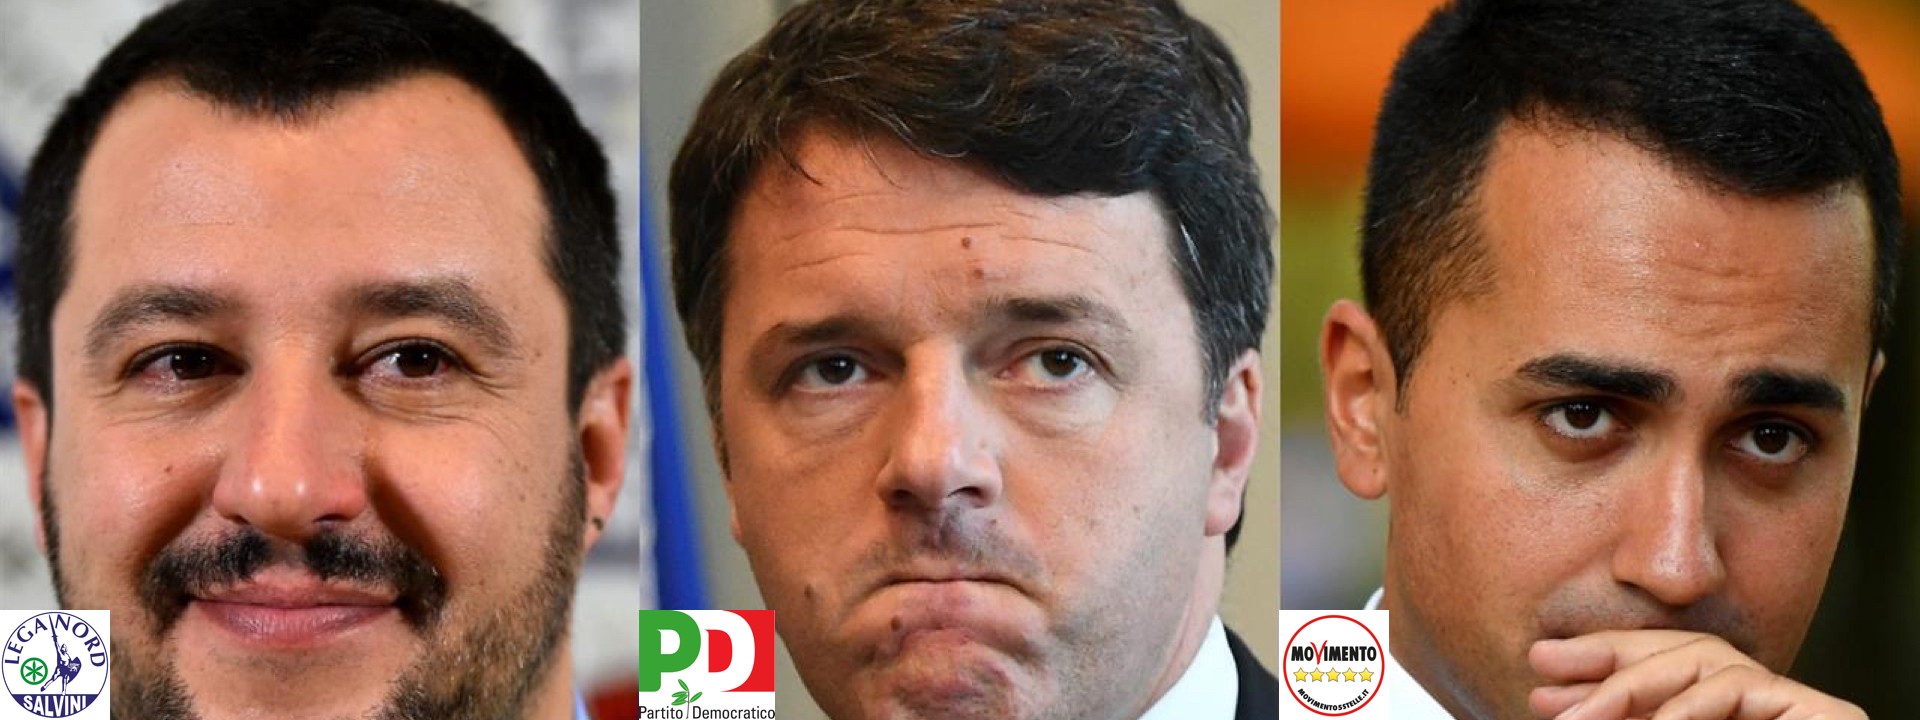 #ElectionWatch: Italy on High Alert Ahead of March Elections